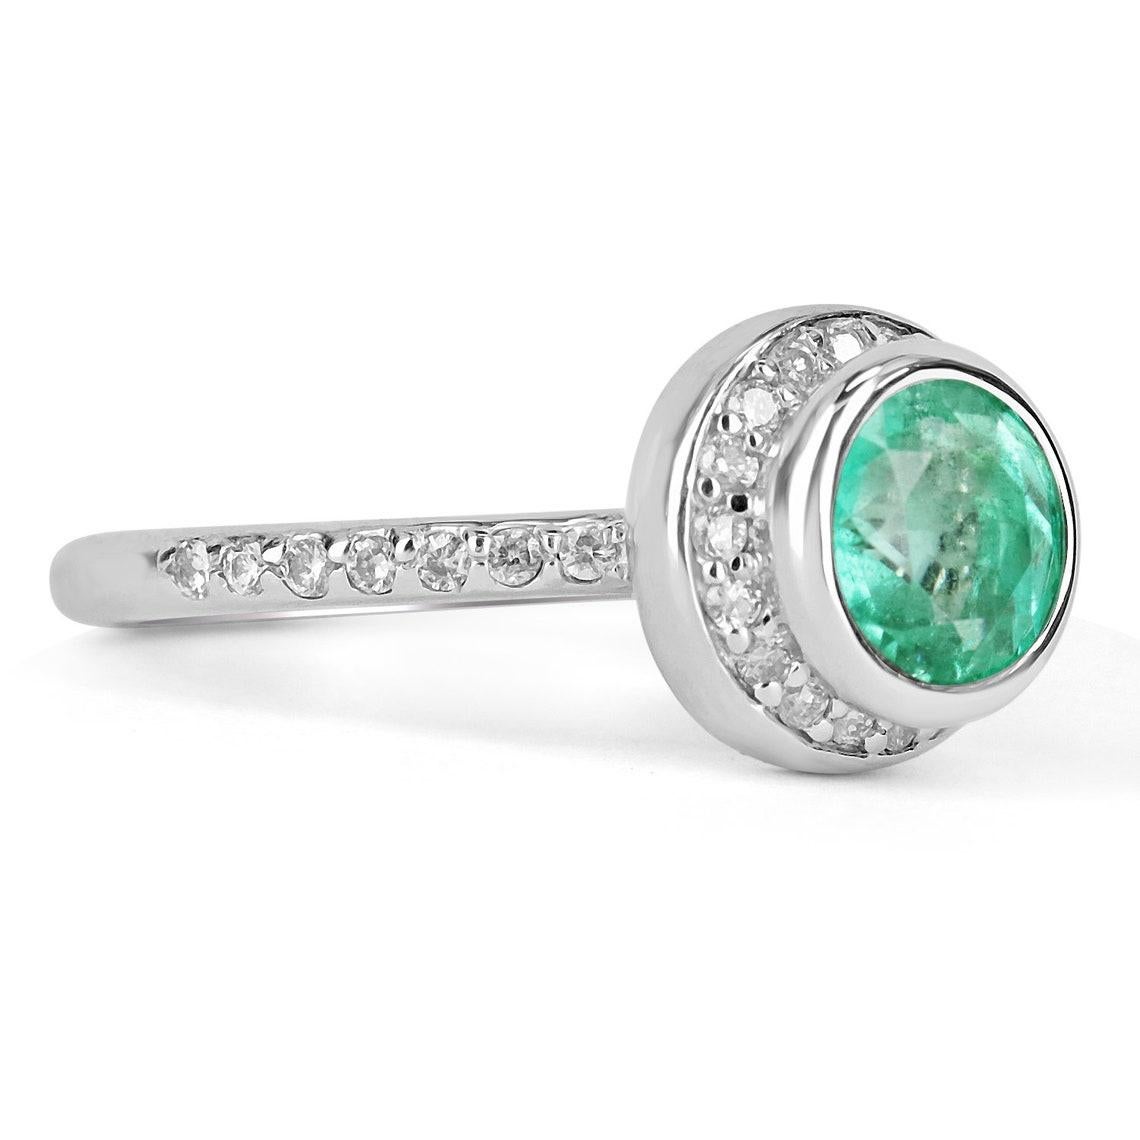 This is a very rare, round Colombian emerald and diamond halo ring. a luminous, round emerald has vivacious color and incredible transparency that make it exclusive. The emerald is securely bezel set and is accented with round diamonds in a halo